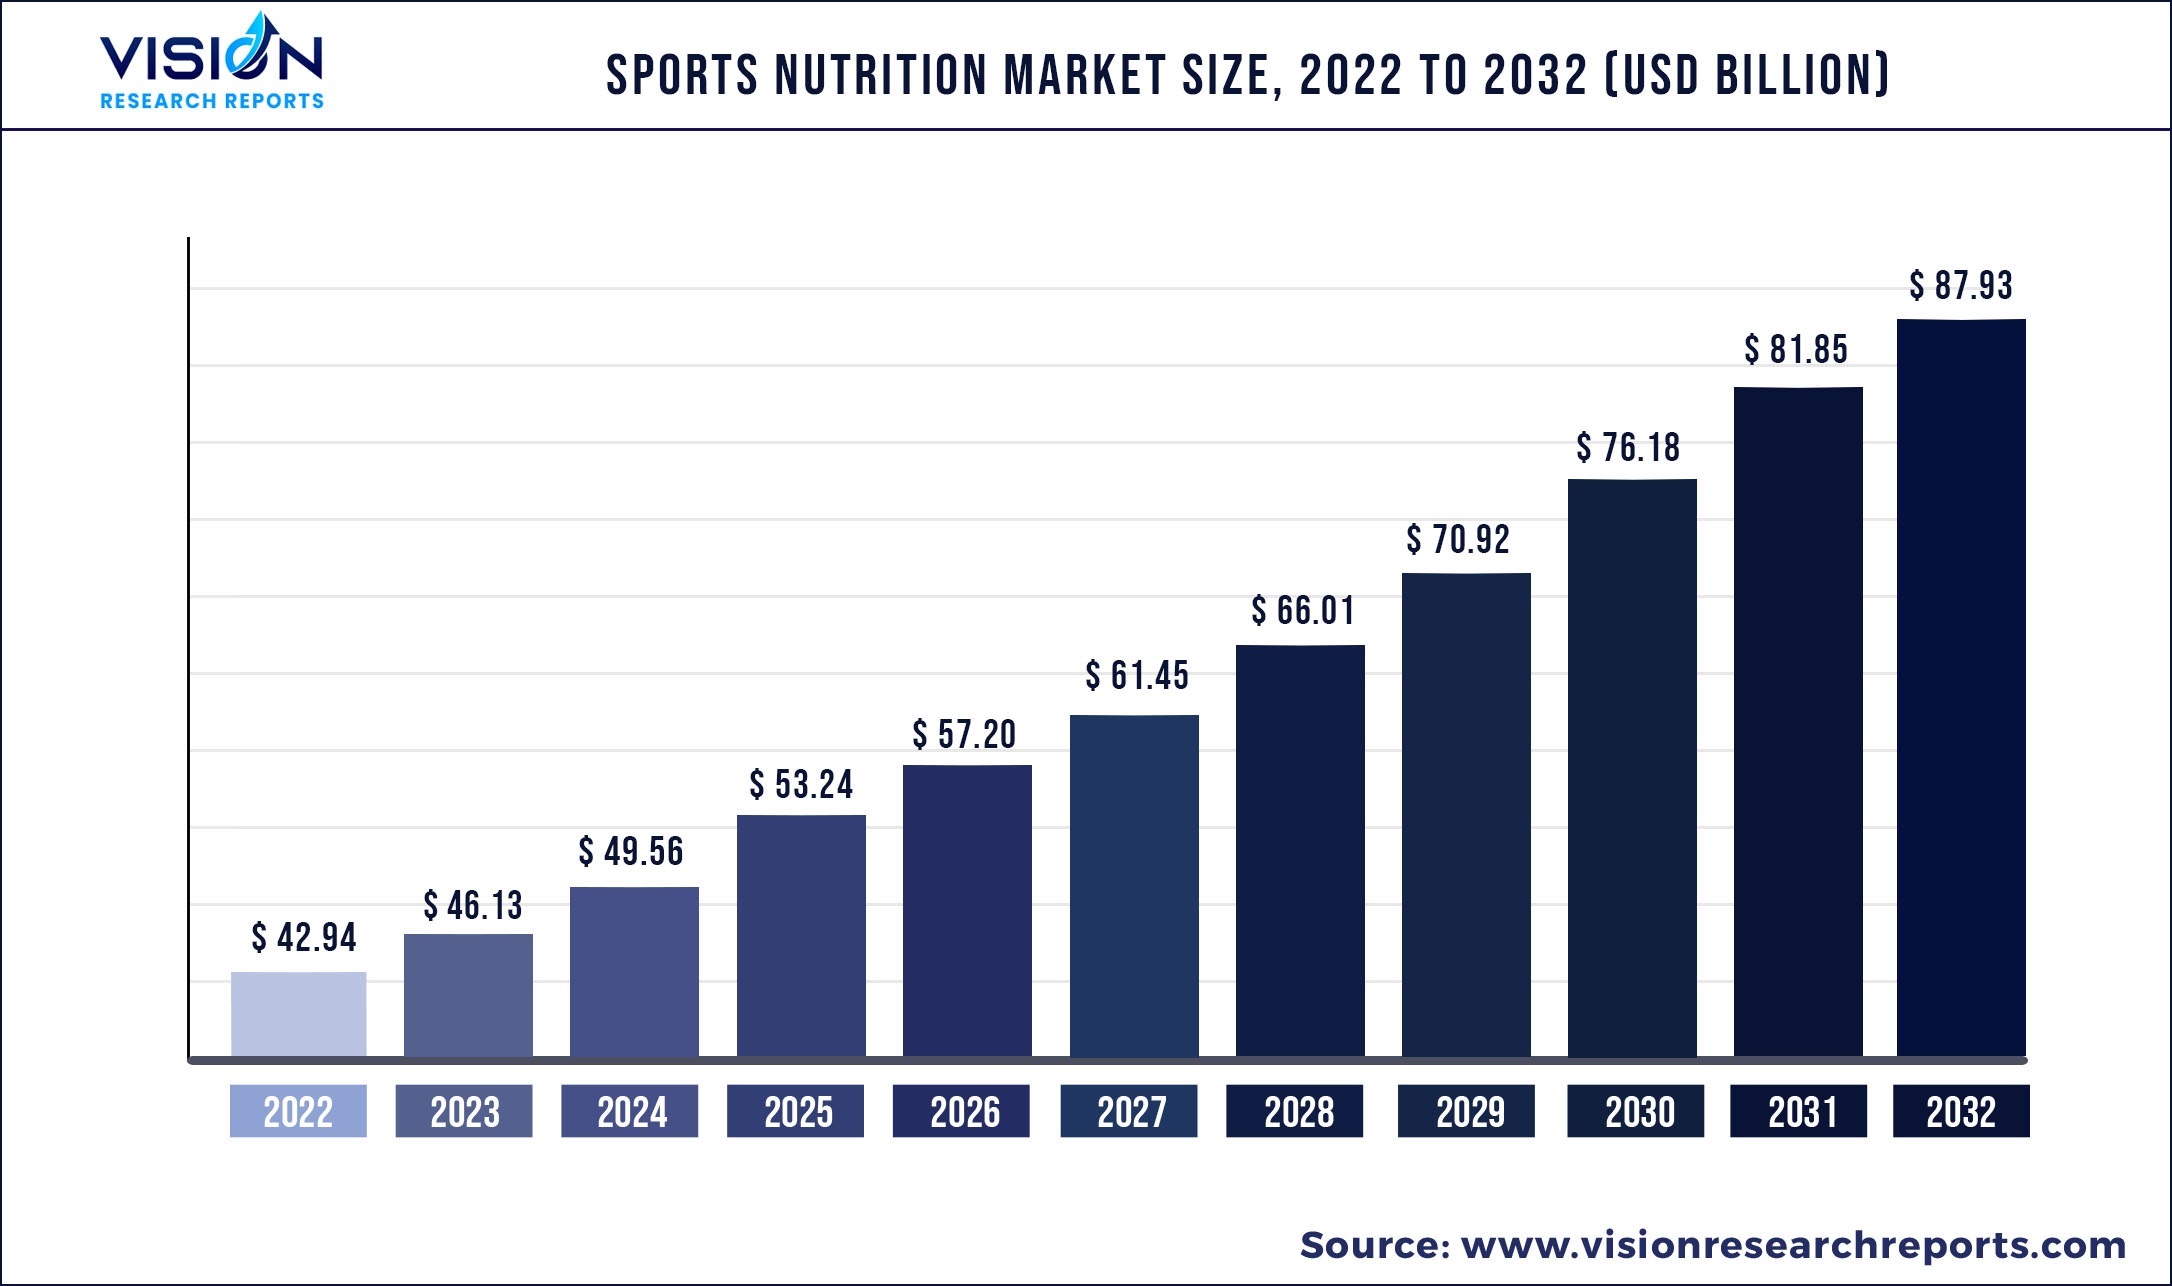 Sports Nutrition Market Size 2023 to 2032